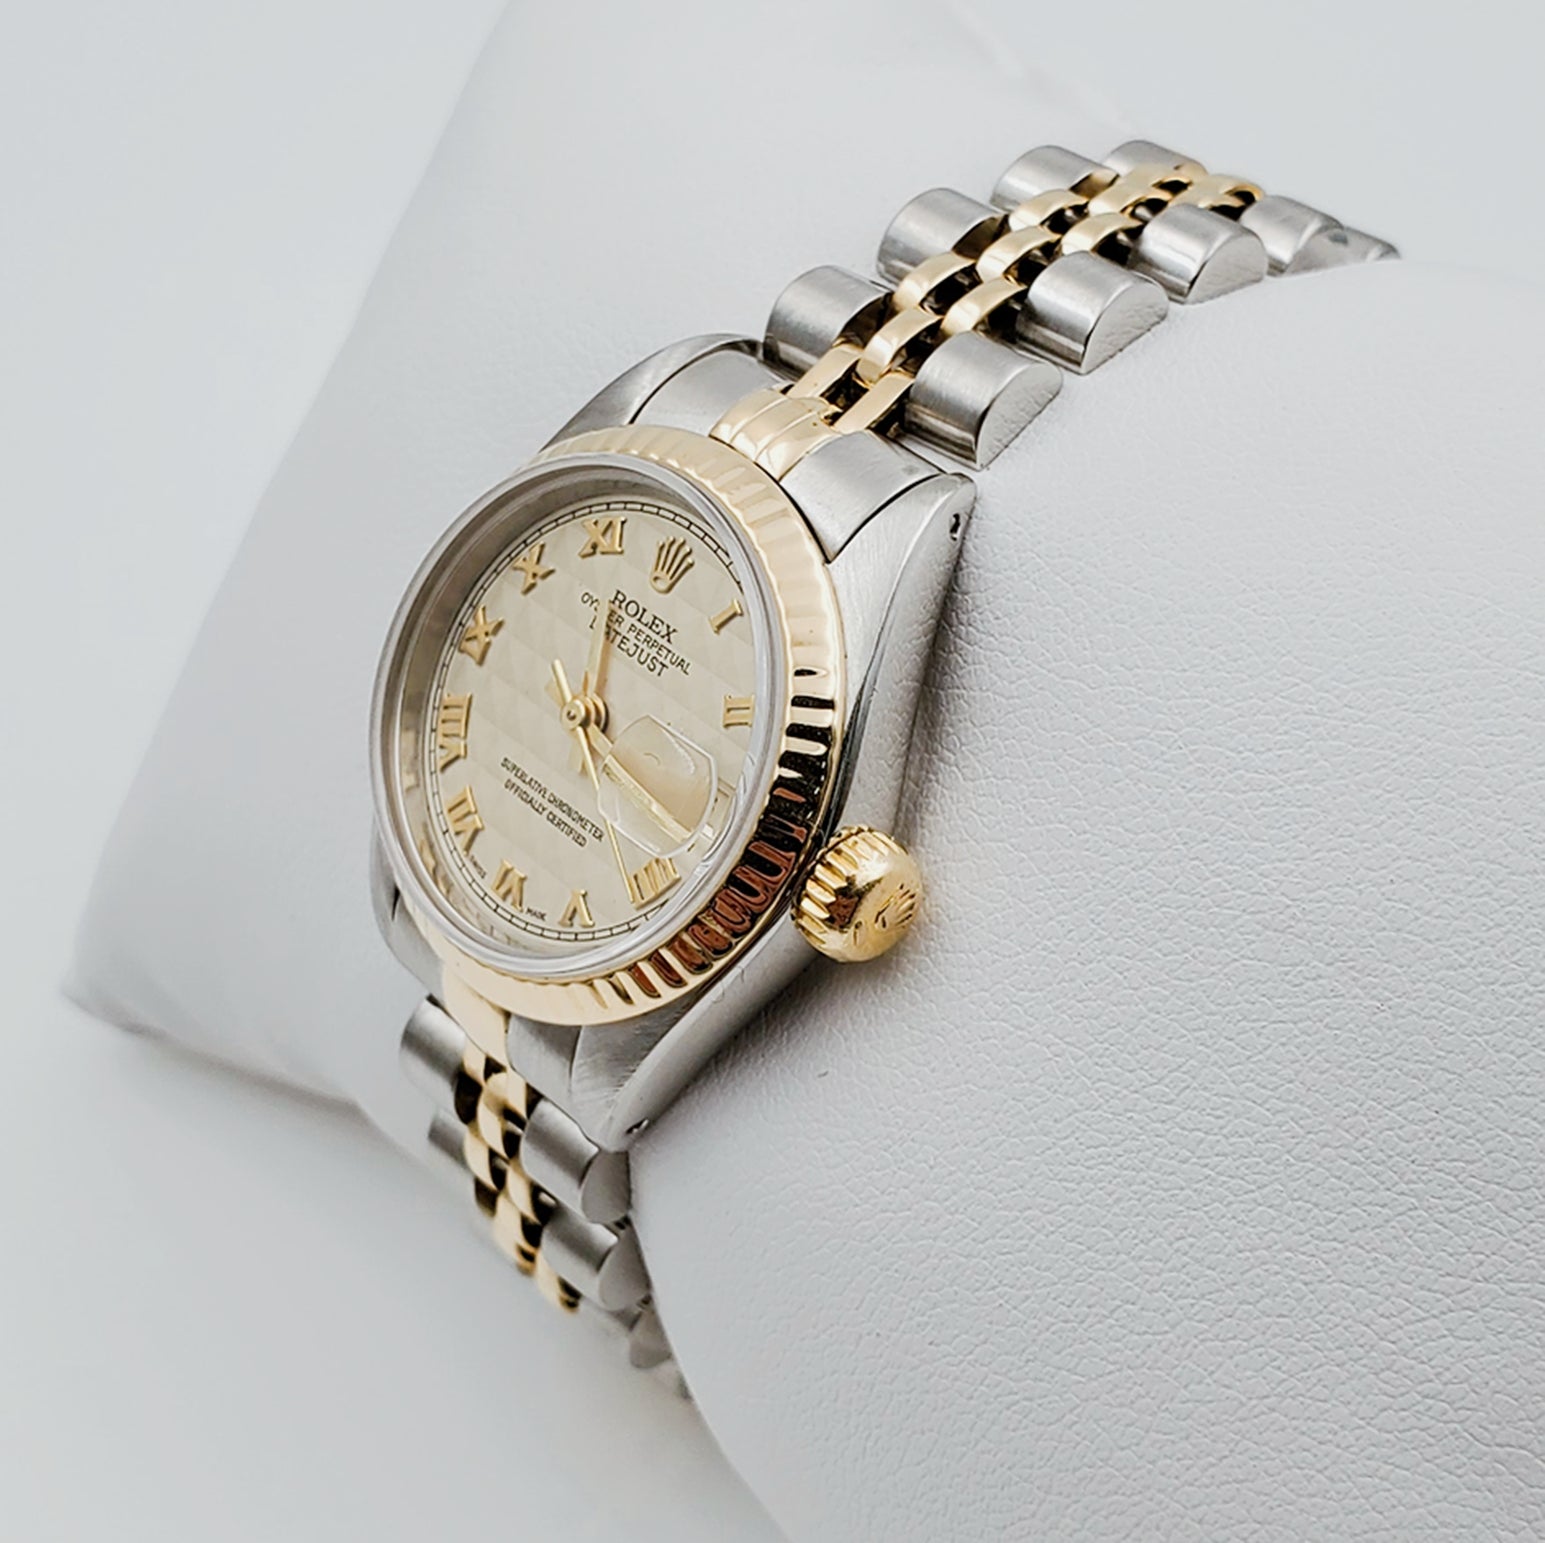 Women's Rolex 18K Gold 26mm Two-Tone DateJust Watch with 3D Gold Dial, Roman Numerals and Fluted Bezel. (Pre-Owned)